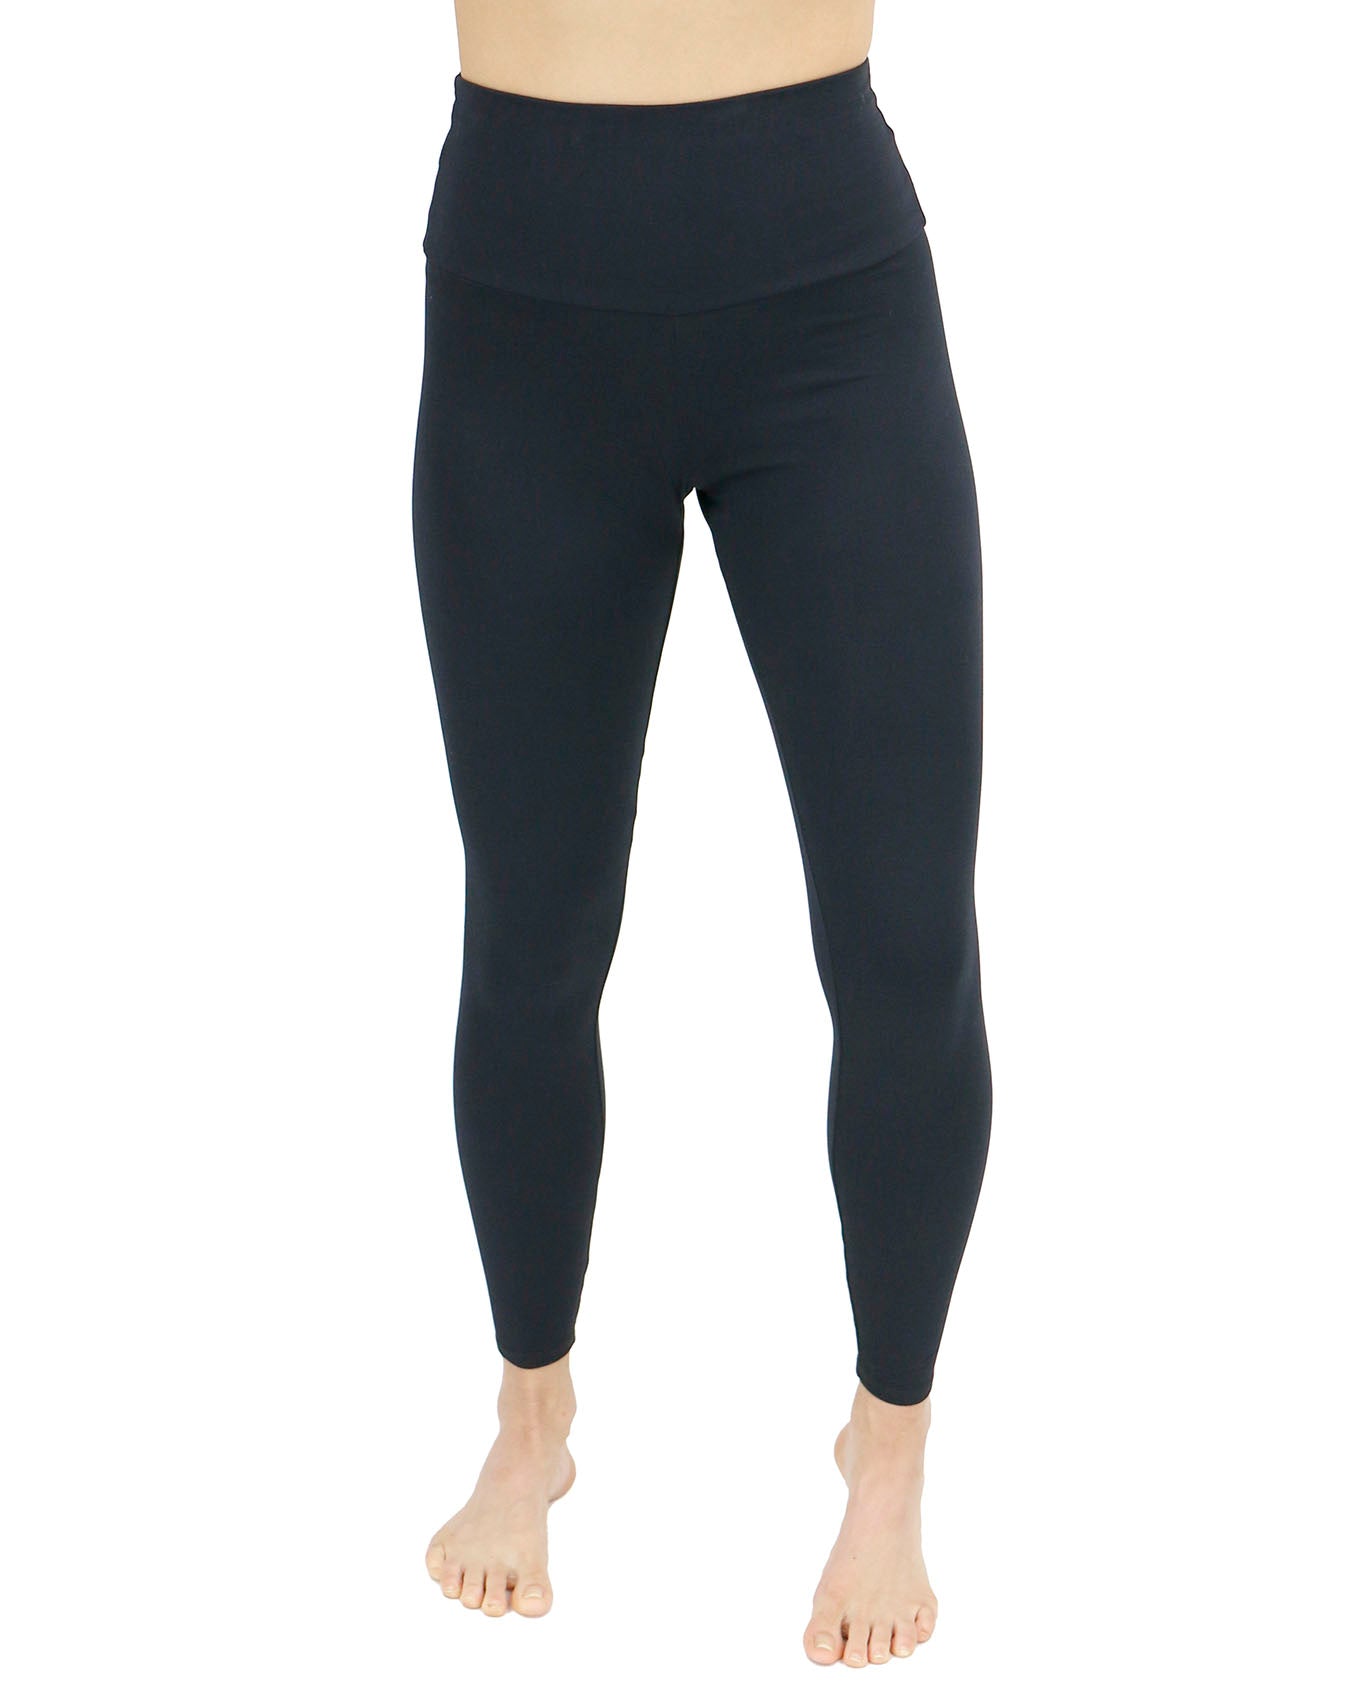 Shine fleece lined leggings – Beatrice and Lilly